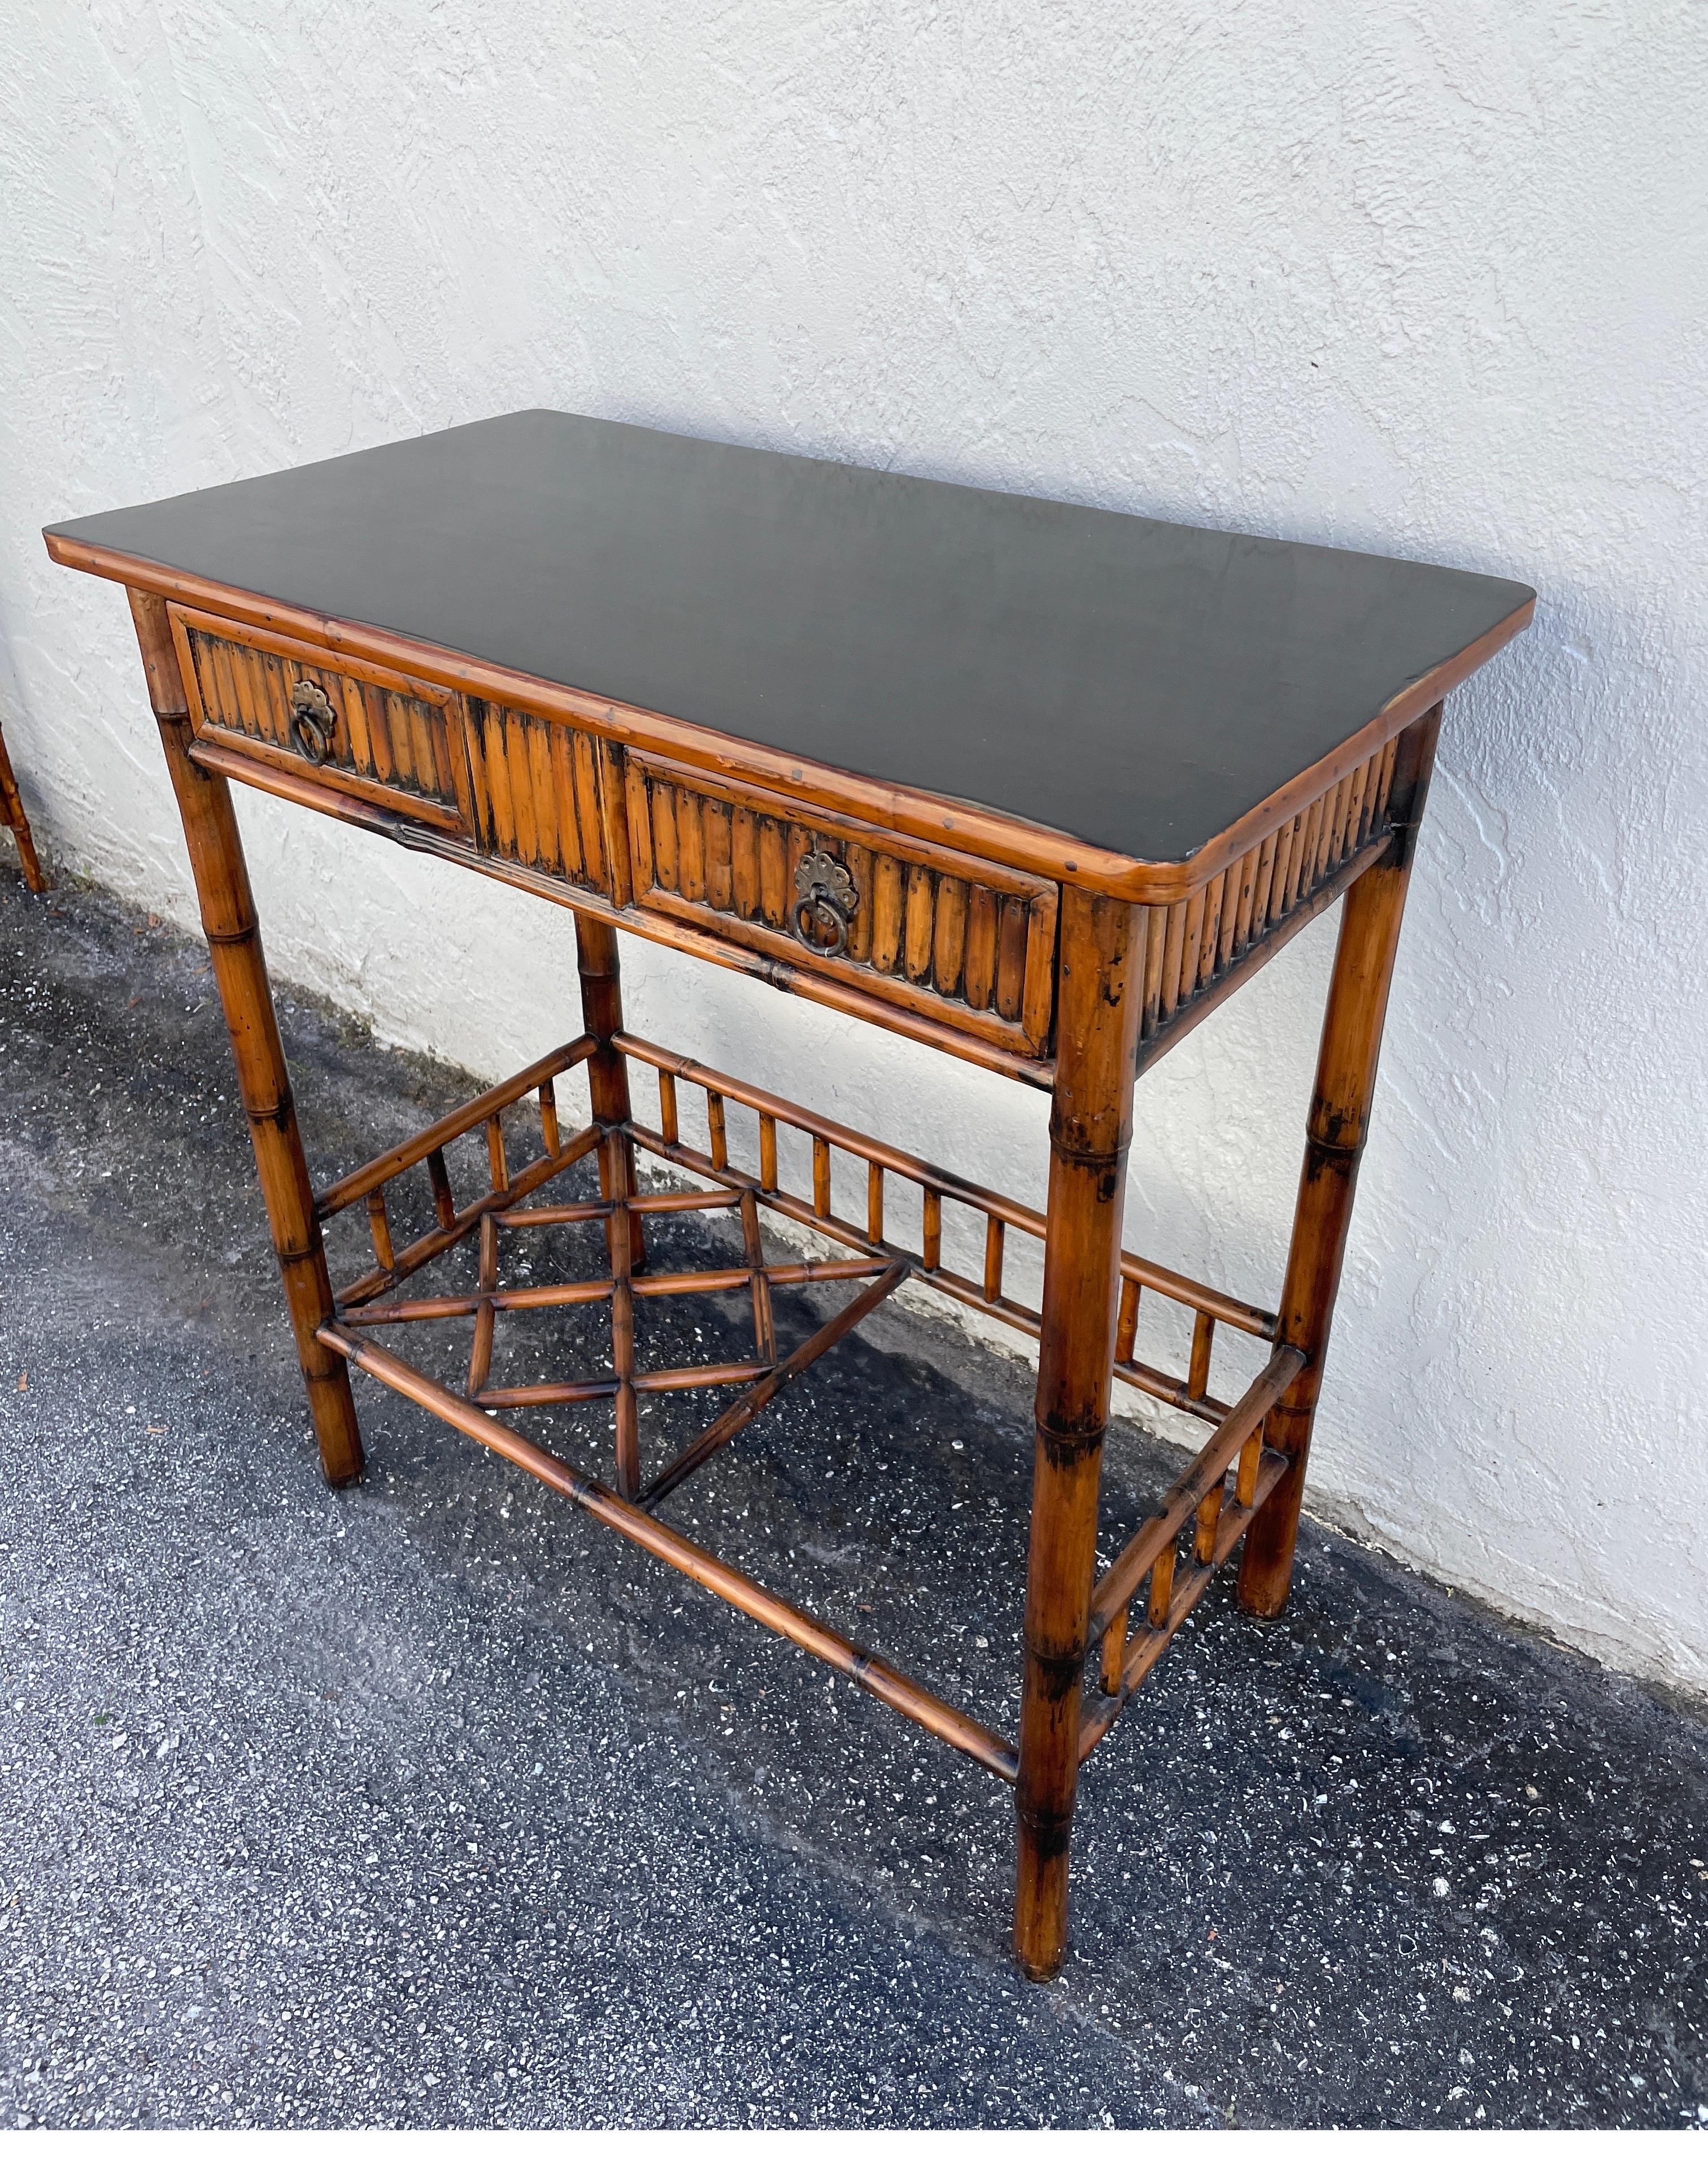 Vintage bamboo table with two drawers & bottom trellis shelf.